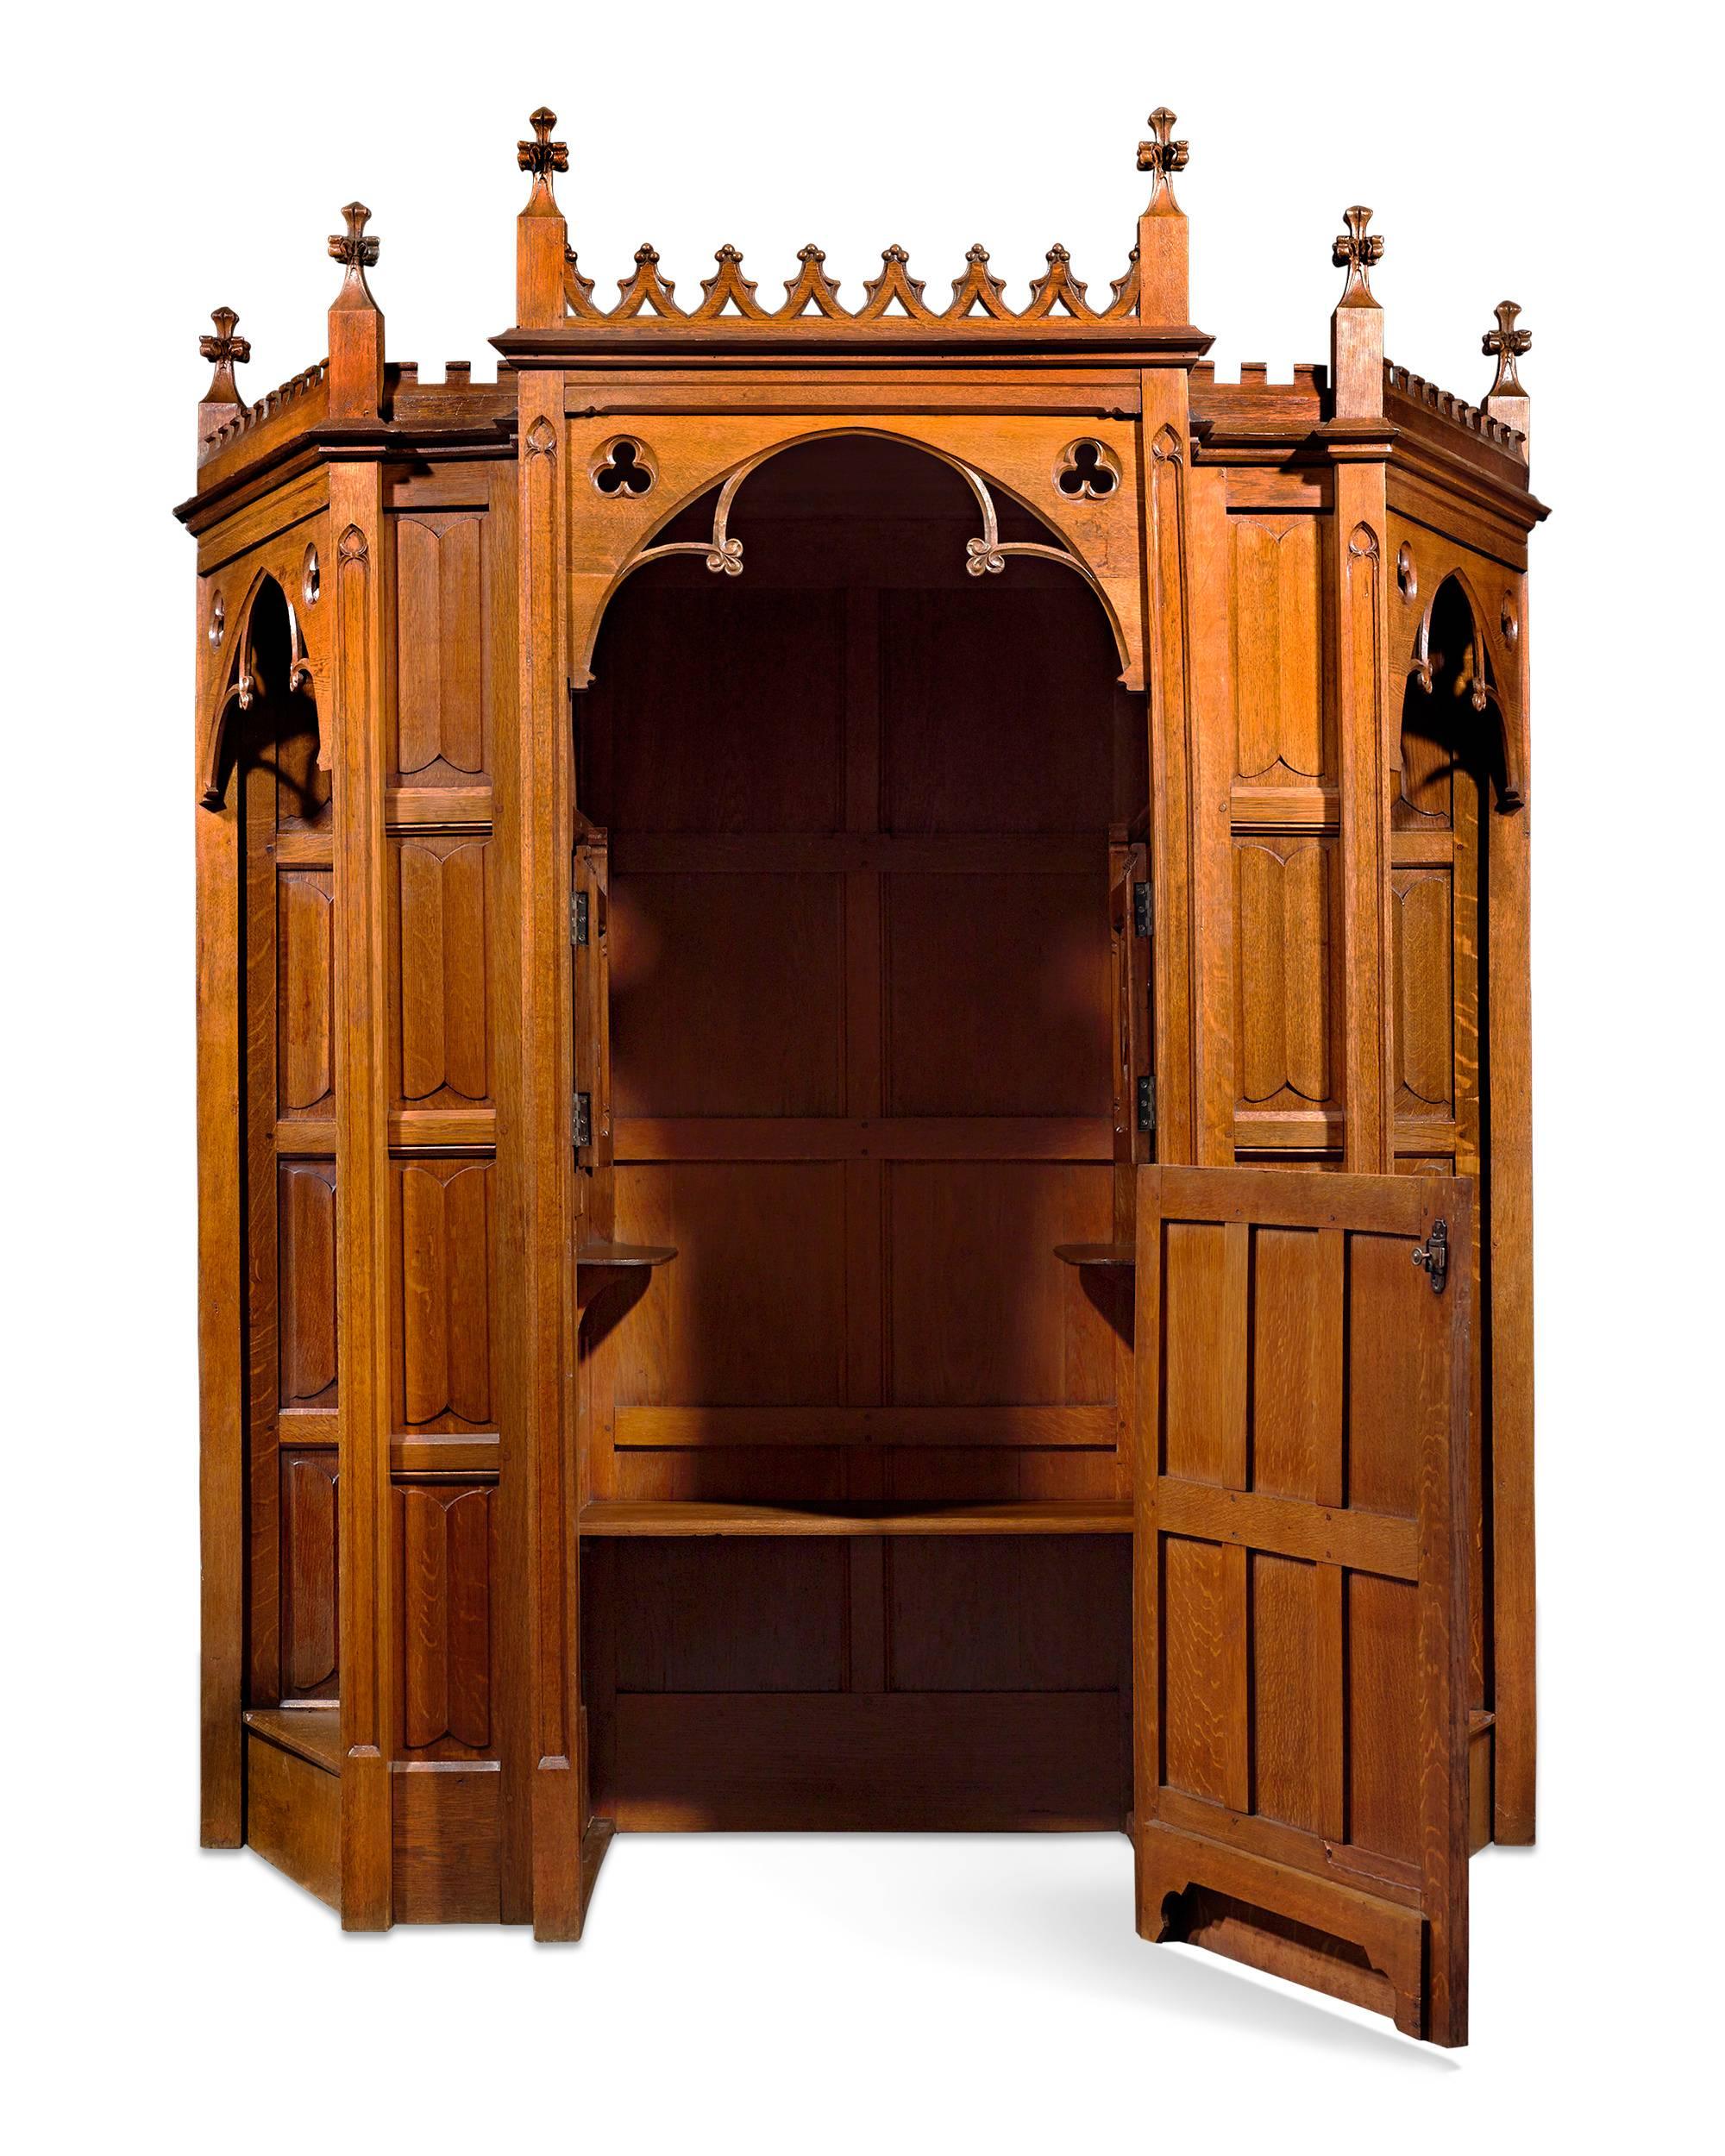 The confessional, which in its modern form dates to the mid-16th century, is typically a removable piece of furniture that is used by priests to hear the confessions of penitents. The typically wooden structure is essentially divided in half: one